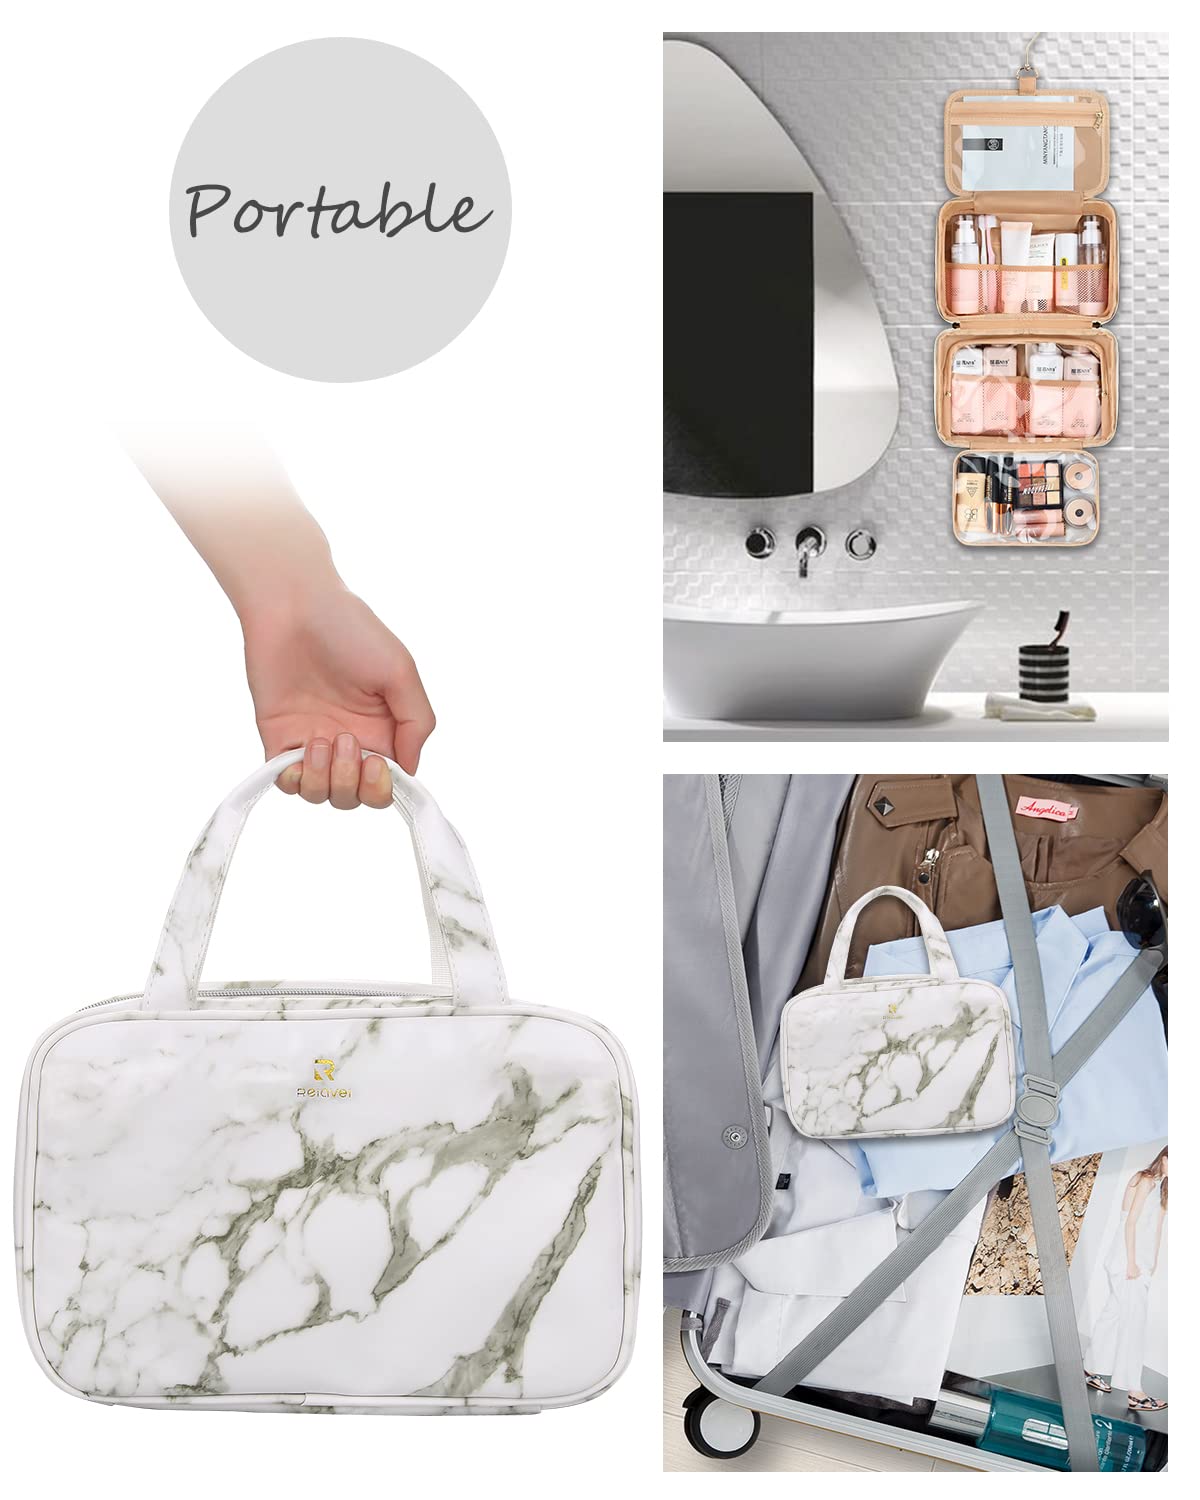 Large Hanging Travel Toiletry Bag for Women, Marble Touletry Bag for Traveling, Water-resistant Makeup Cosmetic Bag Travel Organizer for Accessories, Shampoo, Full Sized Container, Toiletries